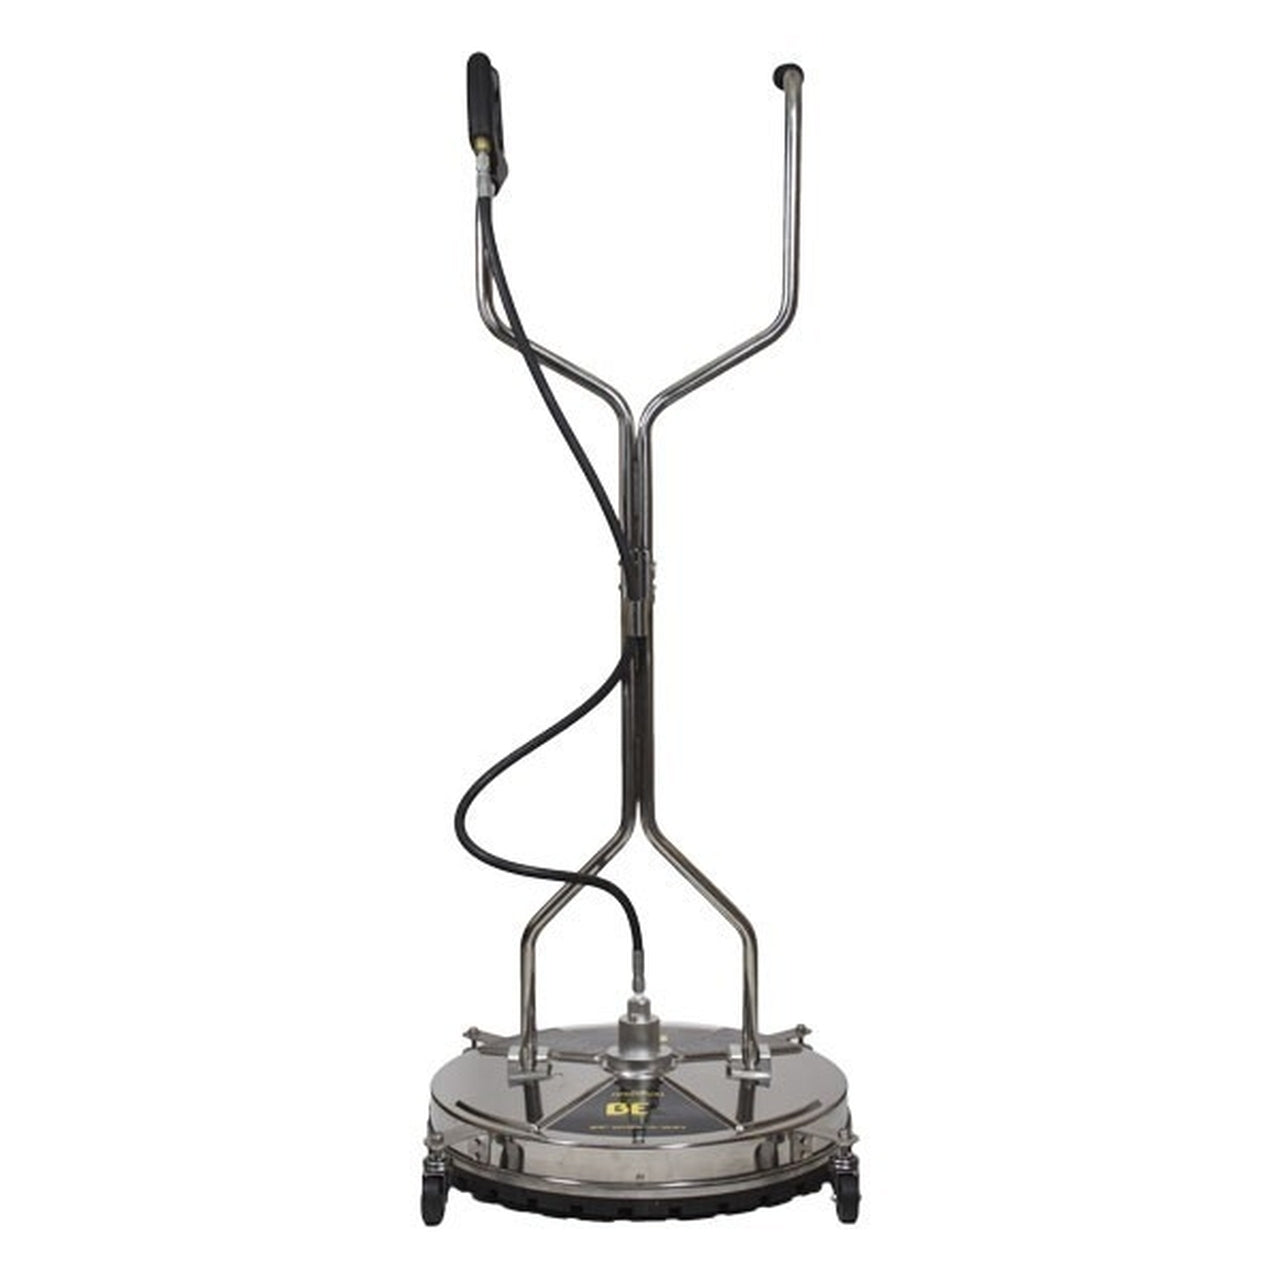 BE 85.403.010 Pressure Whirlaway 24" Stainless Steel Flat Surface Cleaner